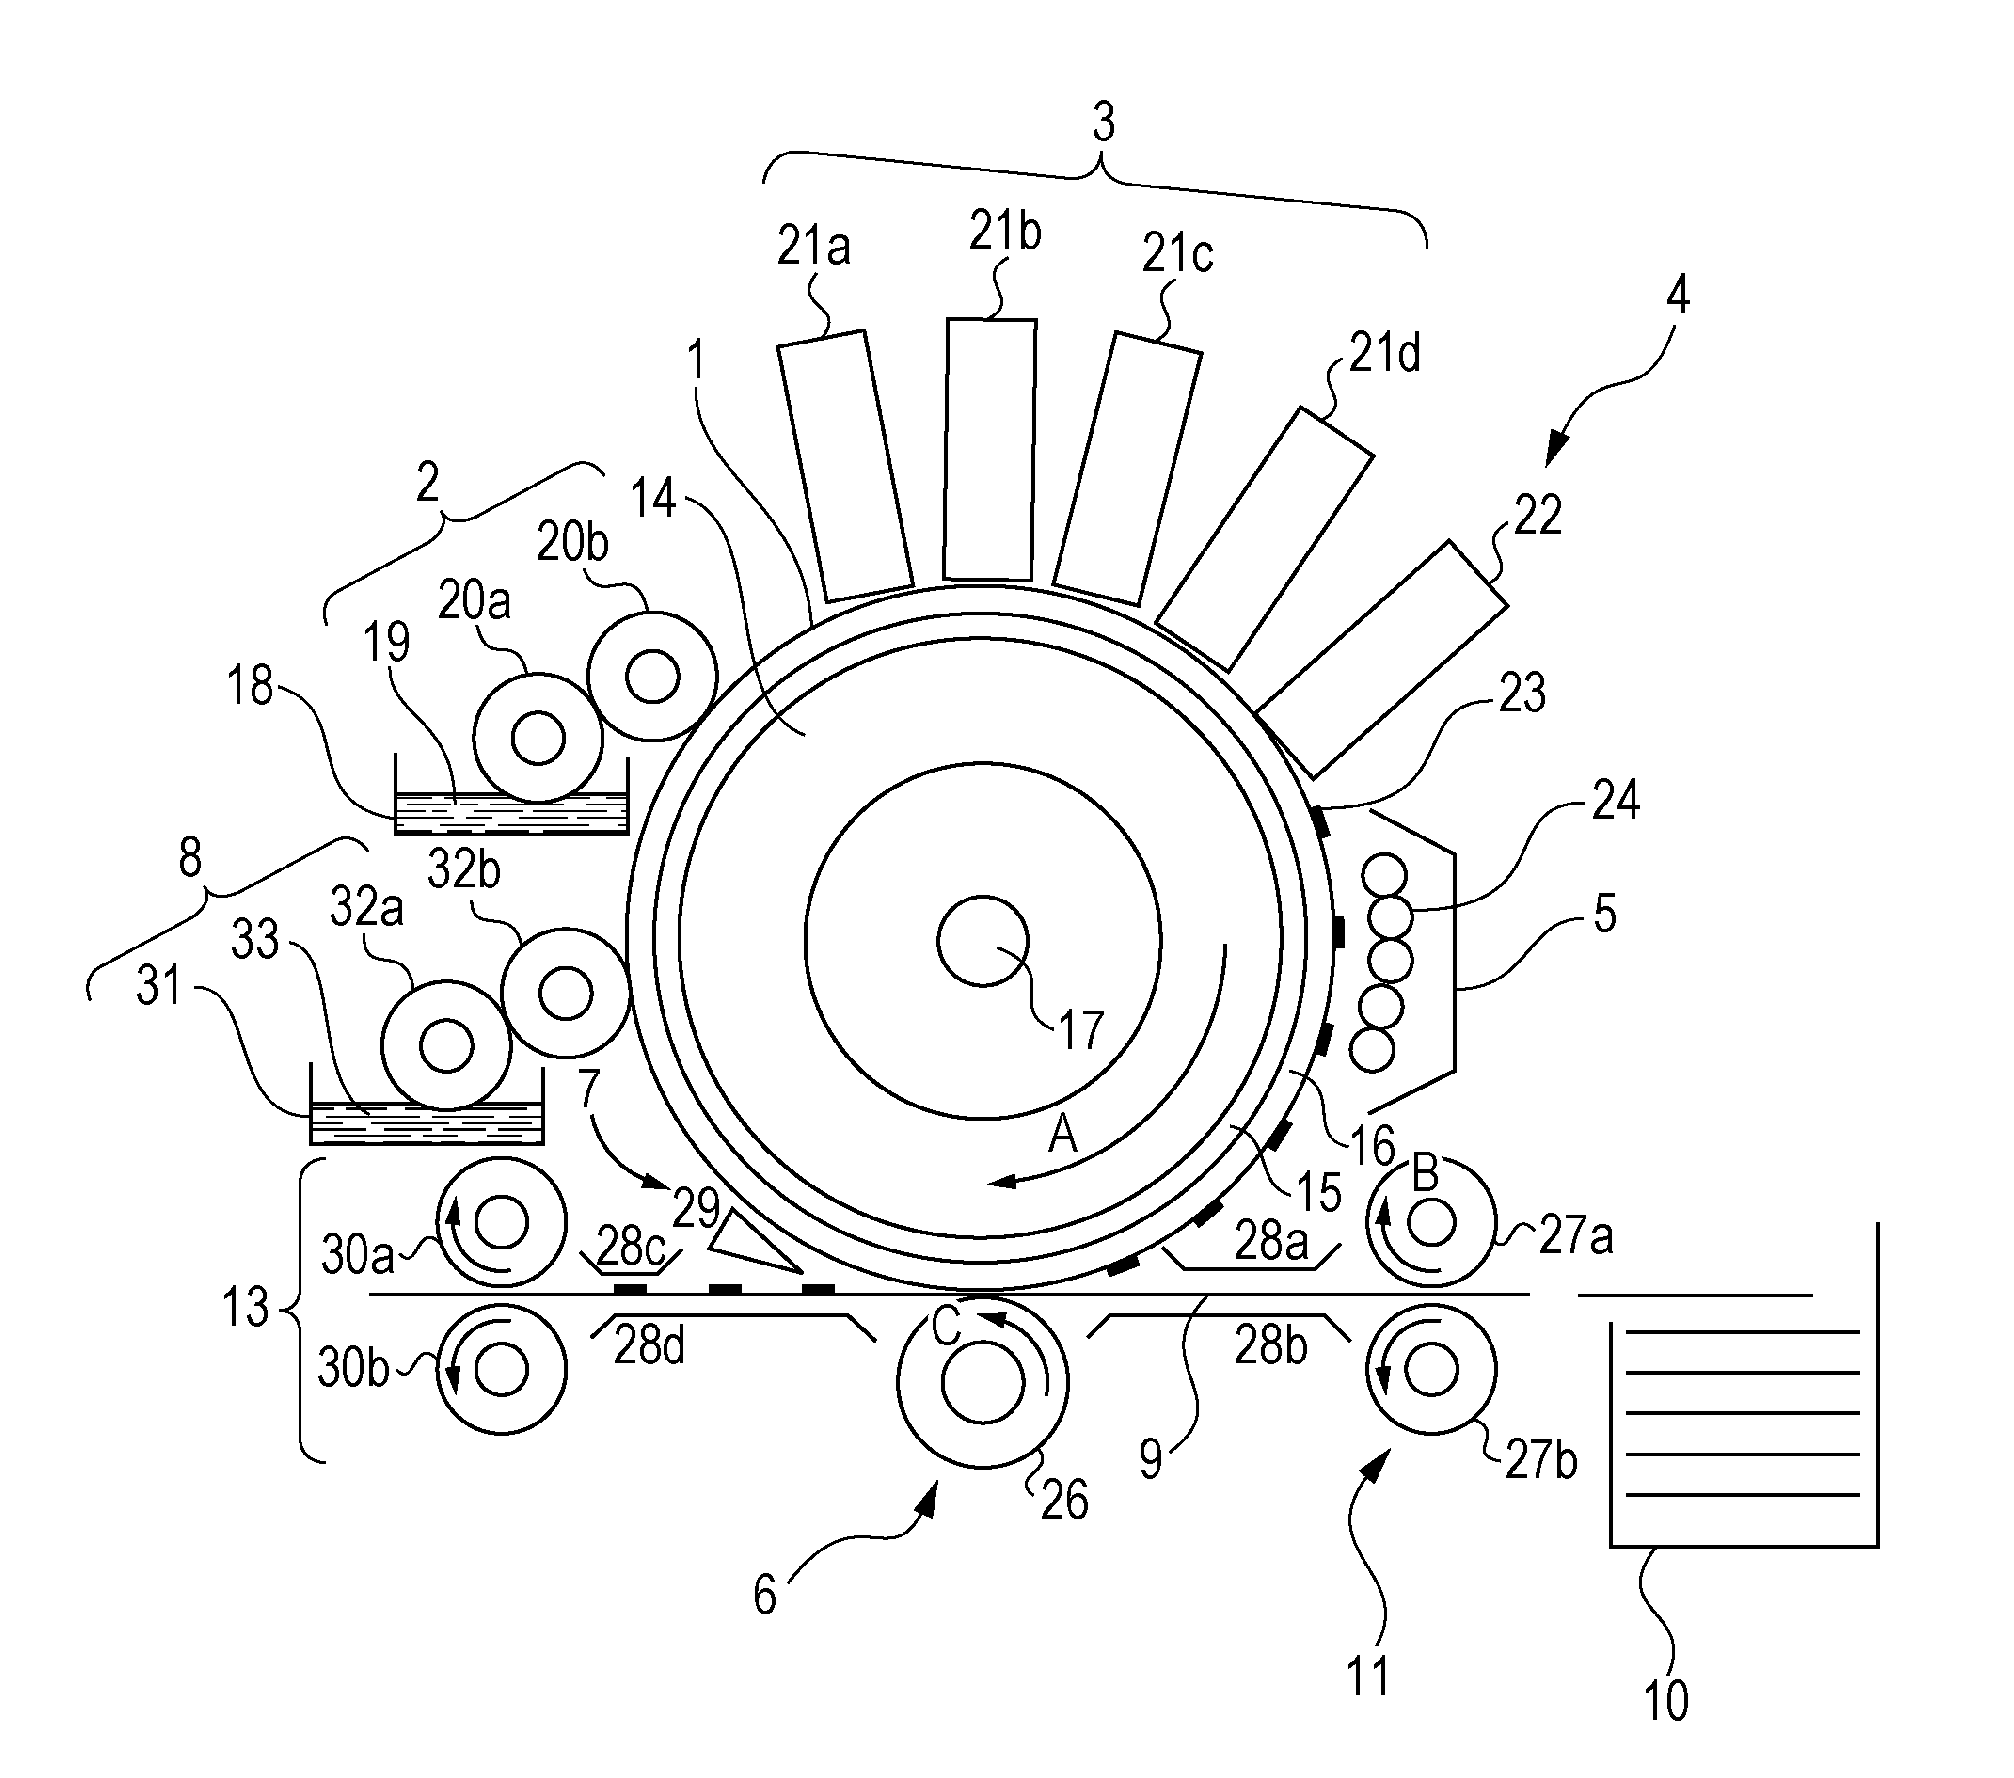 Image forming method and image forming apparatus for forming an image on an intermediate transfer medium